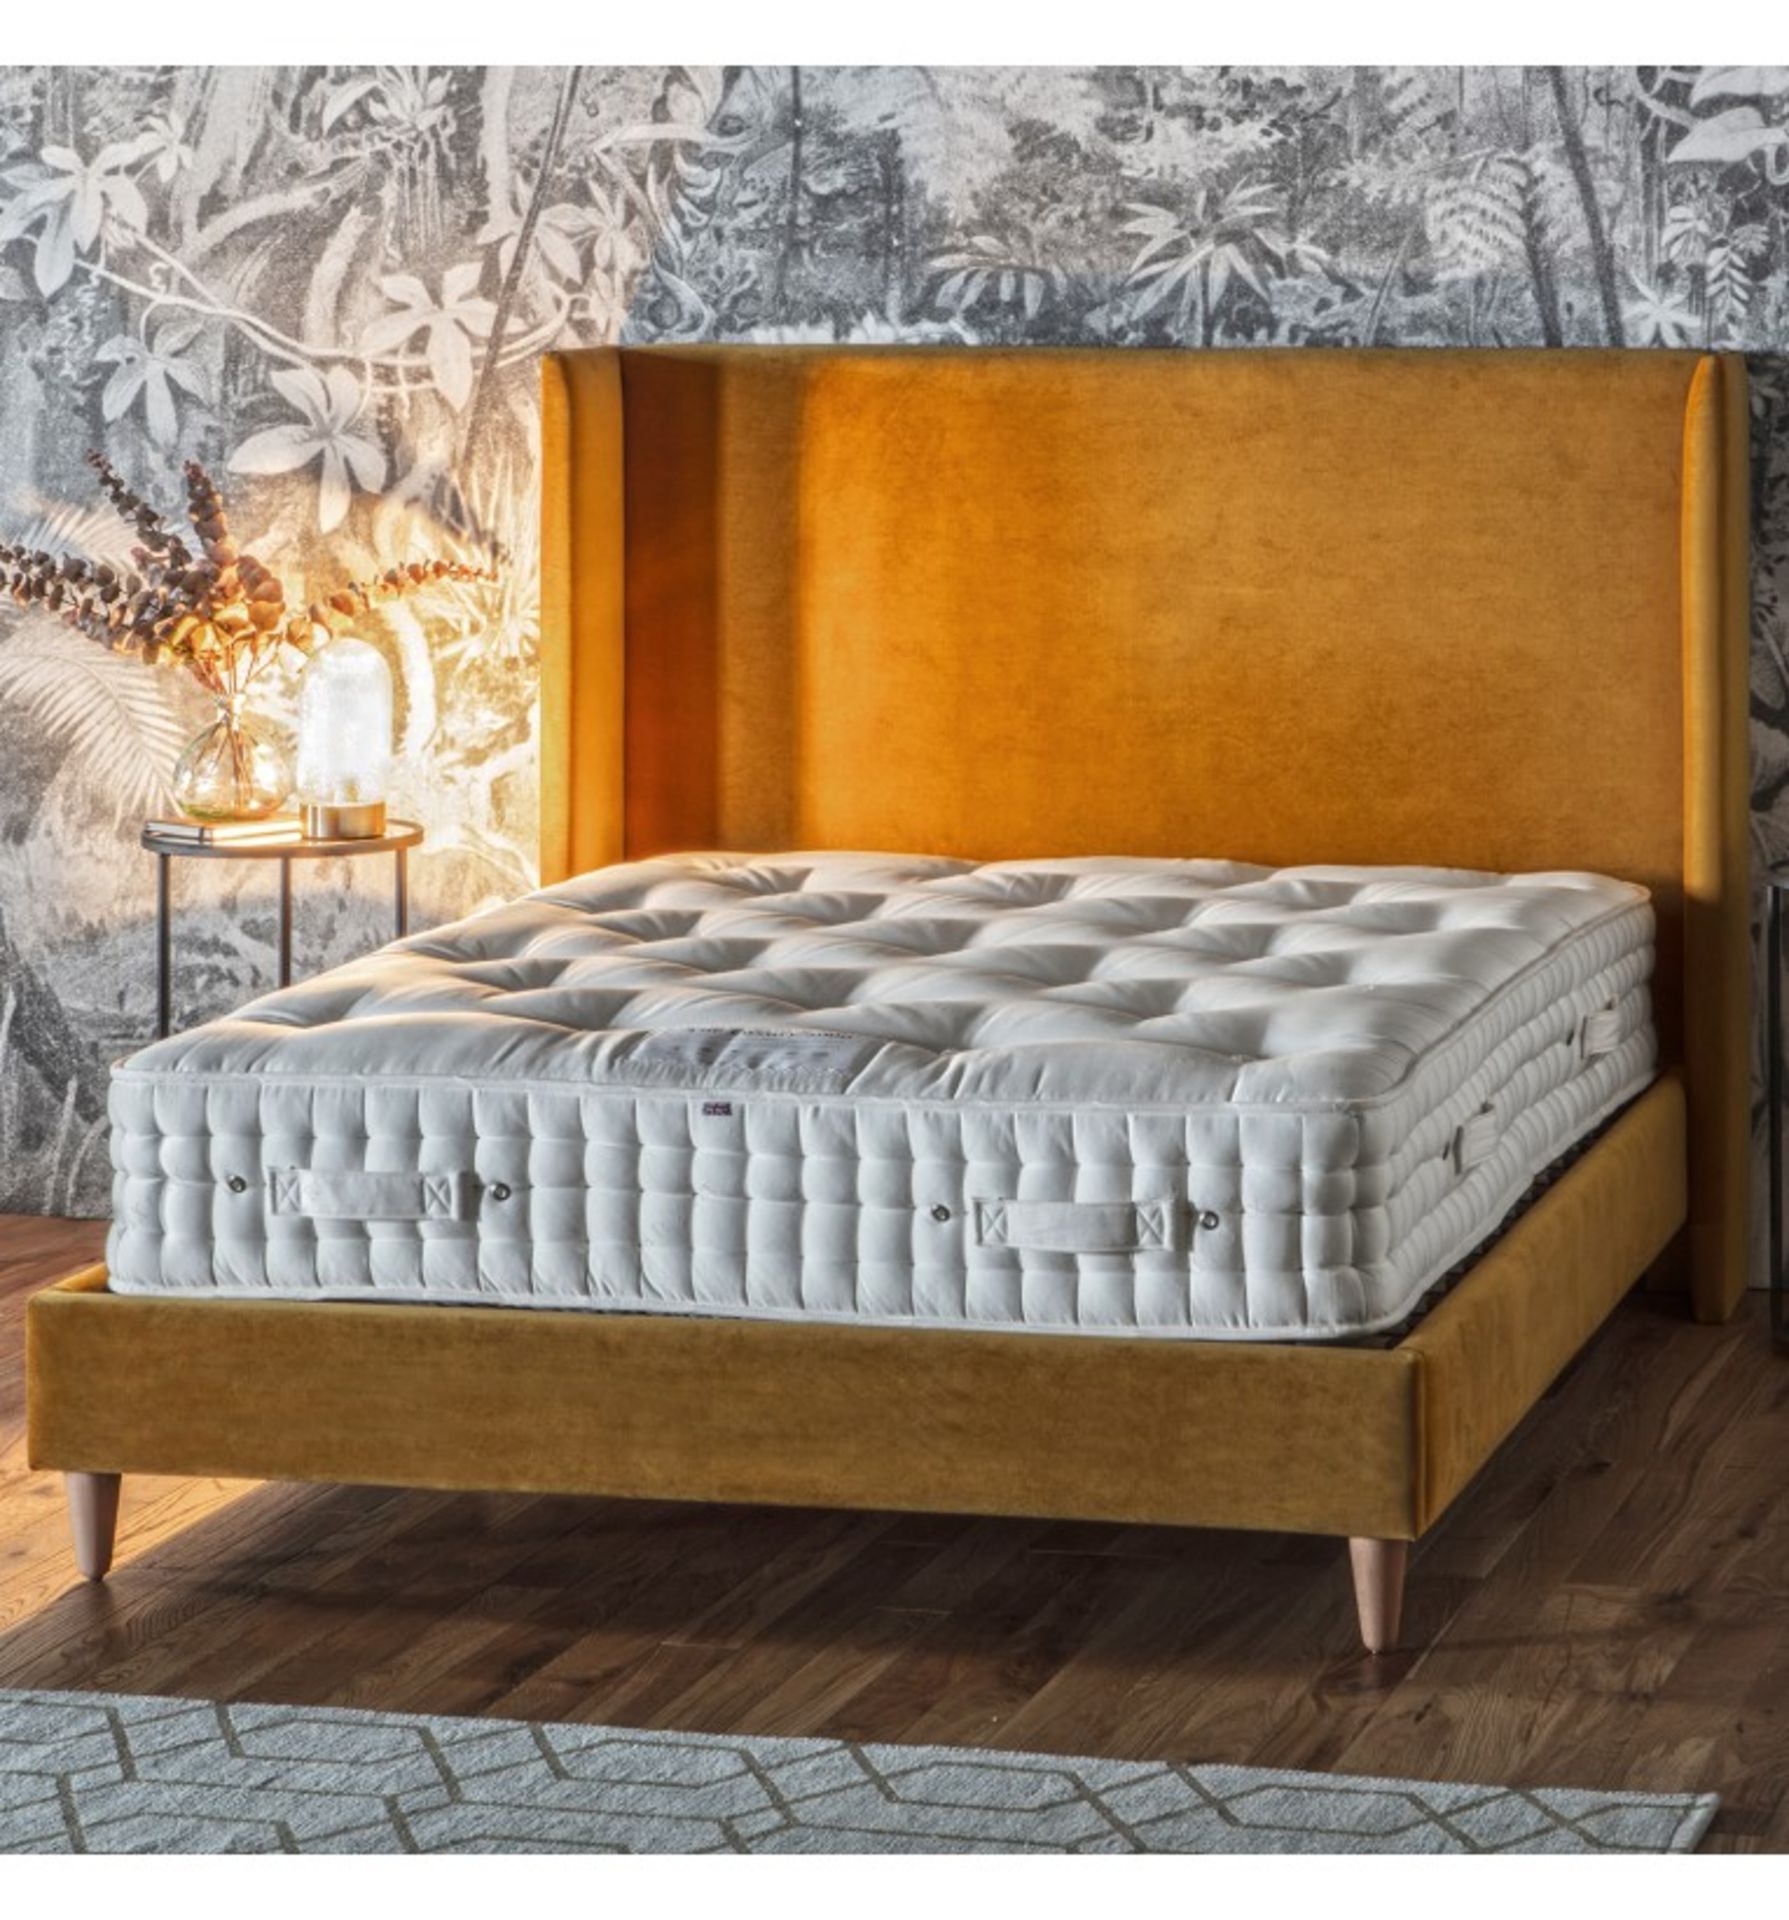 The Luxury 4000 Mattress Firm W1350mm A mattress worthy of its name. Our Luxury Collection